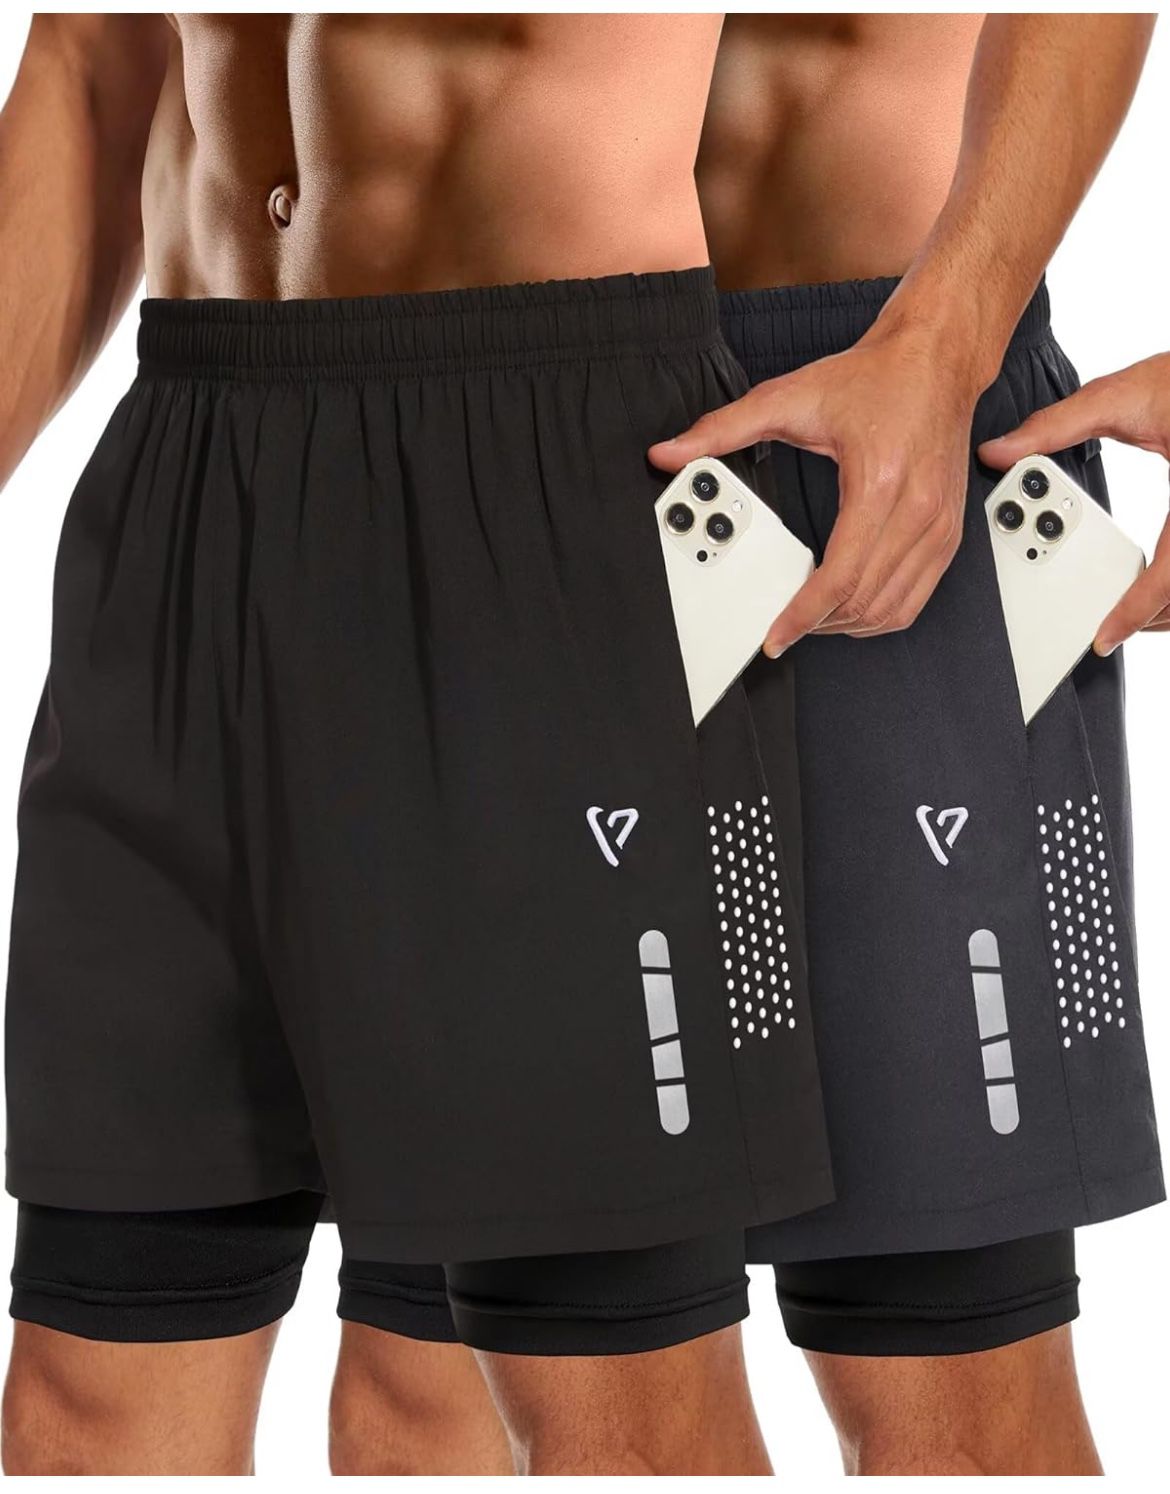 Brand New 2Pack  Men's 2in1 Running Shorts 5''Quick Dry Breathable Mesh Gym Shorts with Zip Pockets&Towel